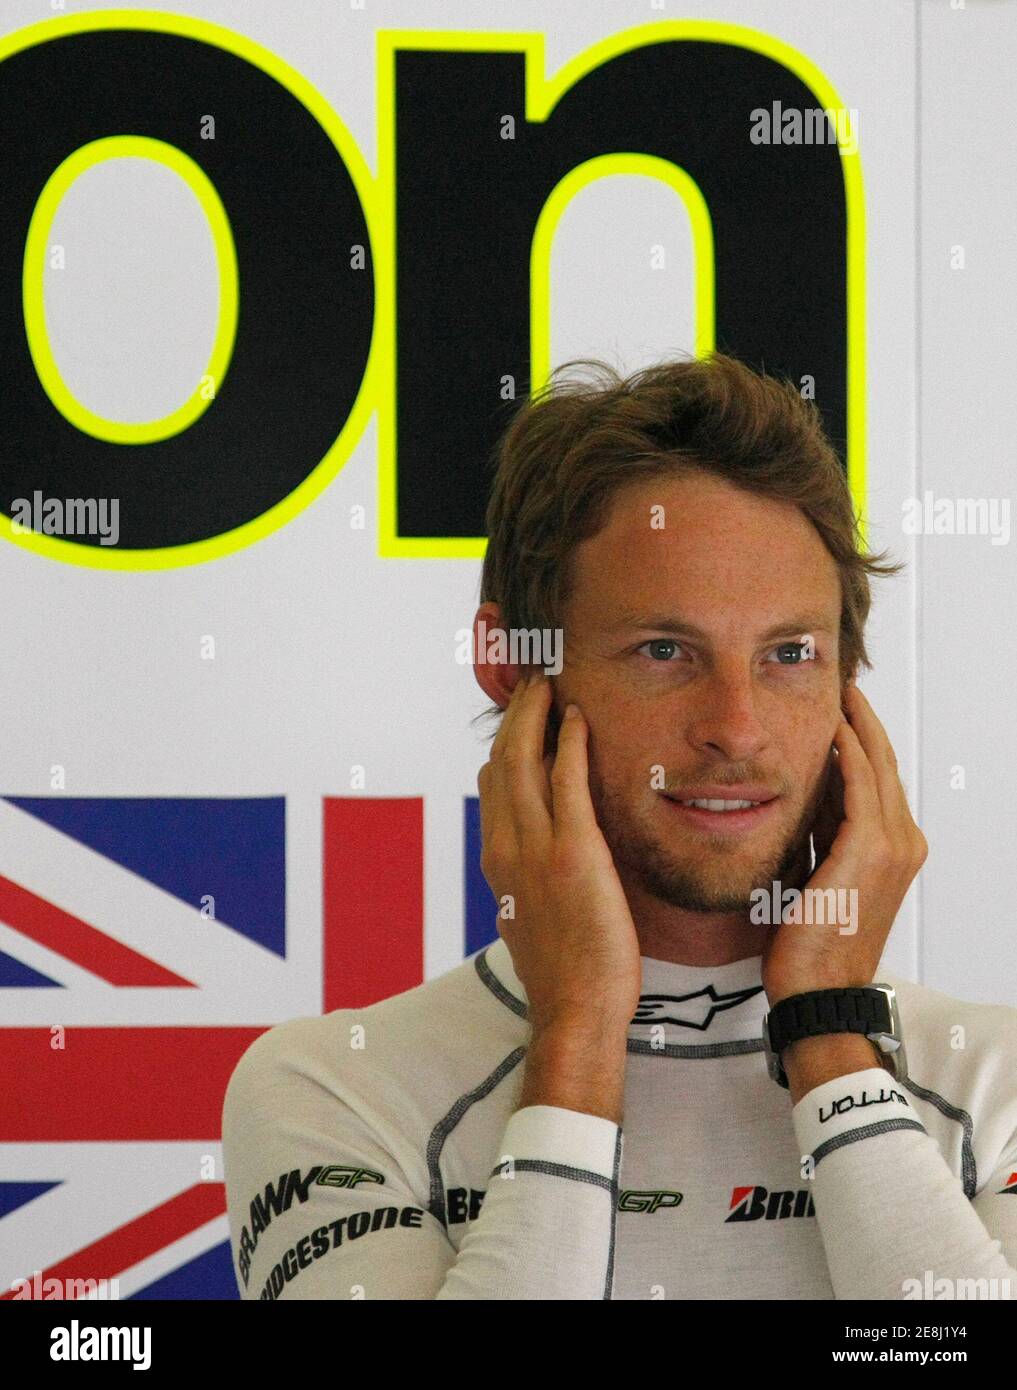 Brawn GP Formula One driver Jenson Button of Britain covers his ears in the pit box during the second practice session for the Turkish F1 Grand Prix at the Istanbul Park racetrack in Istanbul, June 5, 2009.  REUTERS/Pascal Lauener (TURKEY SPORT MOTOR RACING) Stock Photo